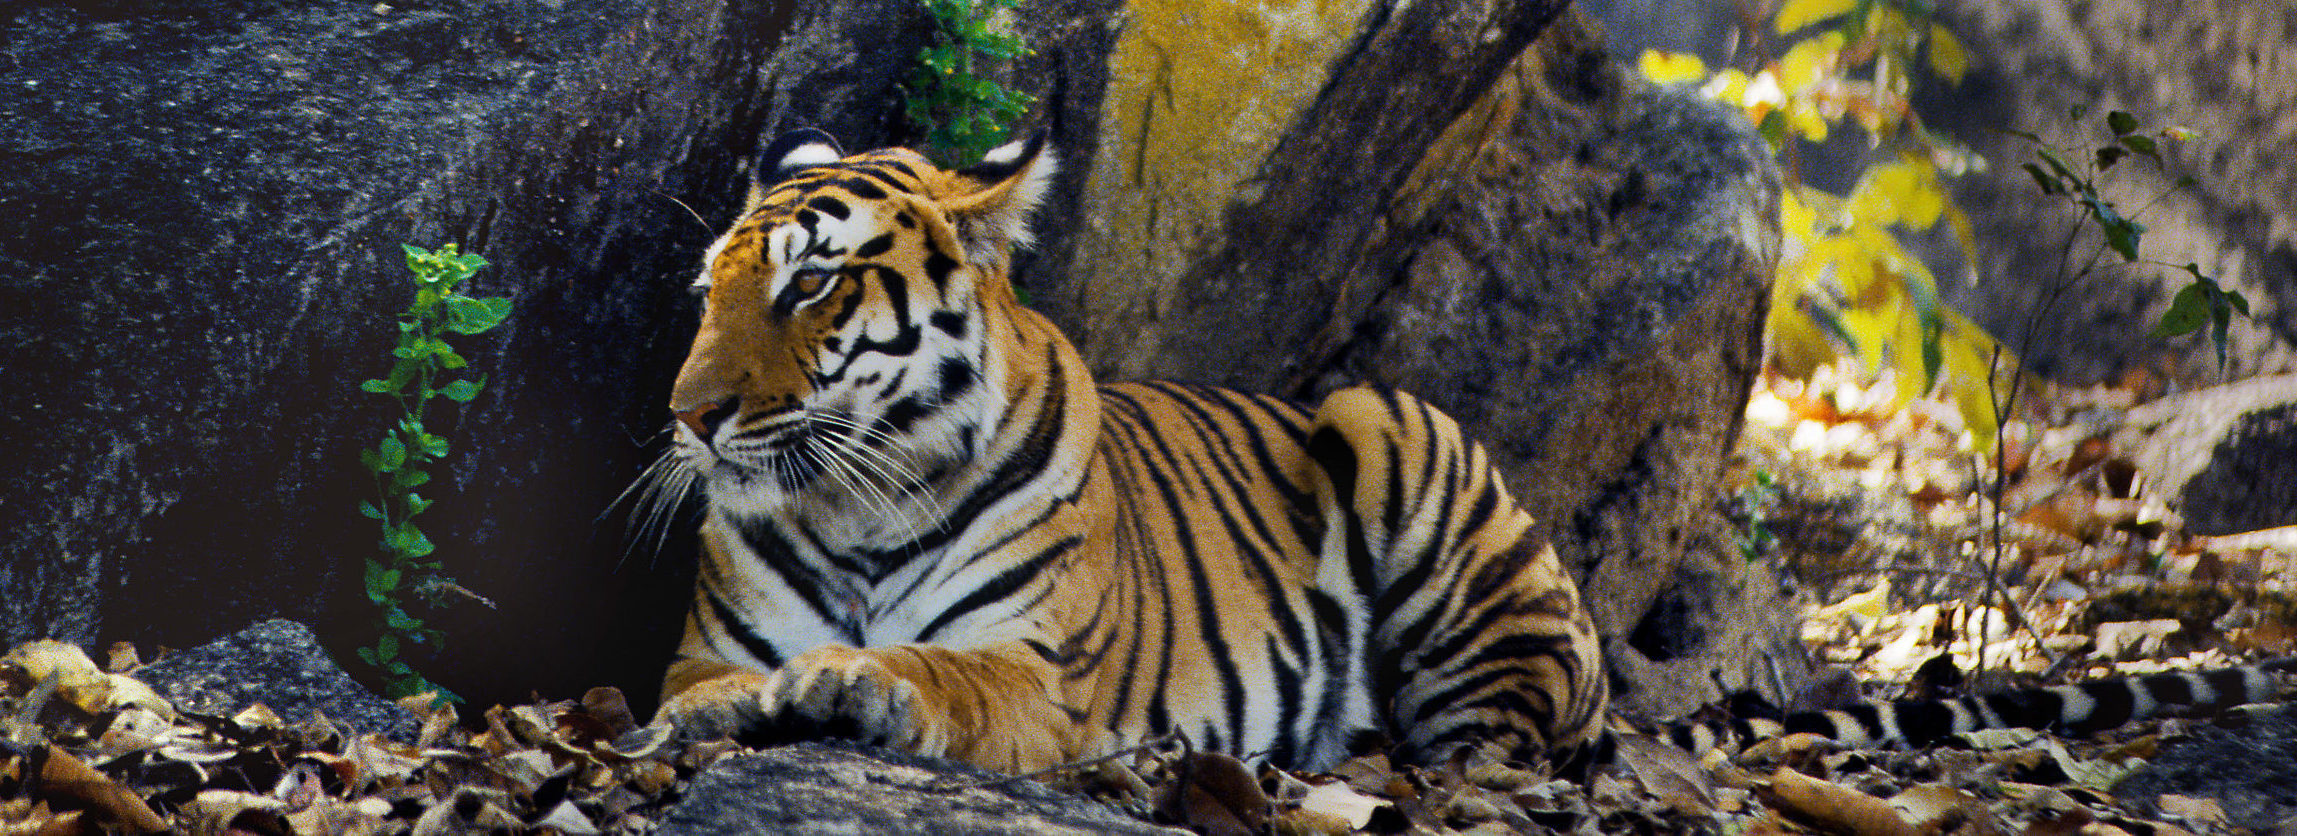 Tiger lying by the side of a rock, India.